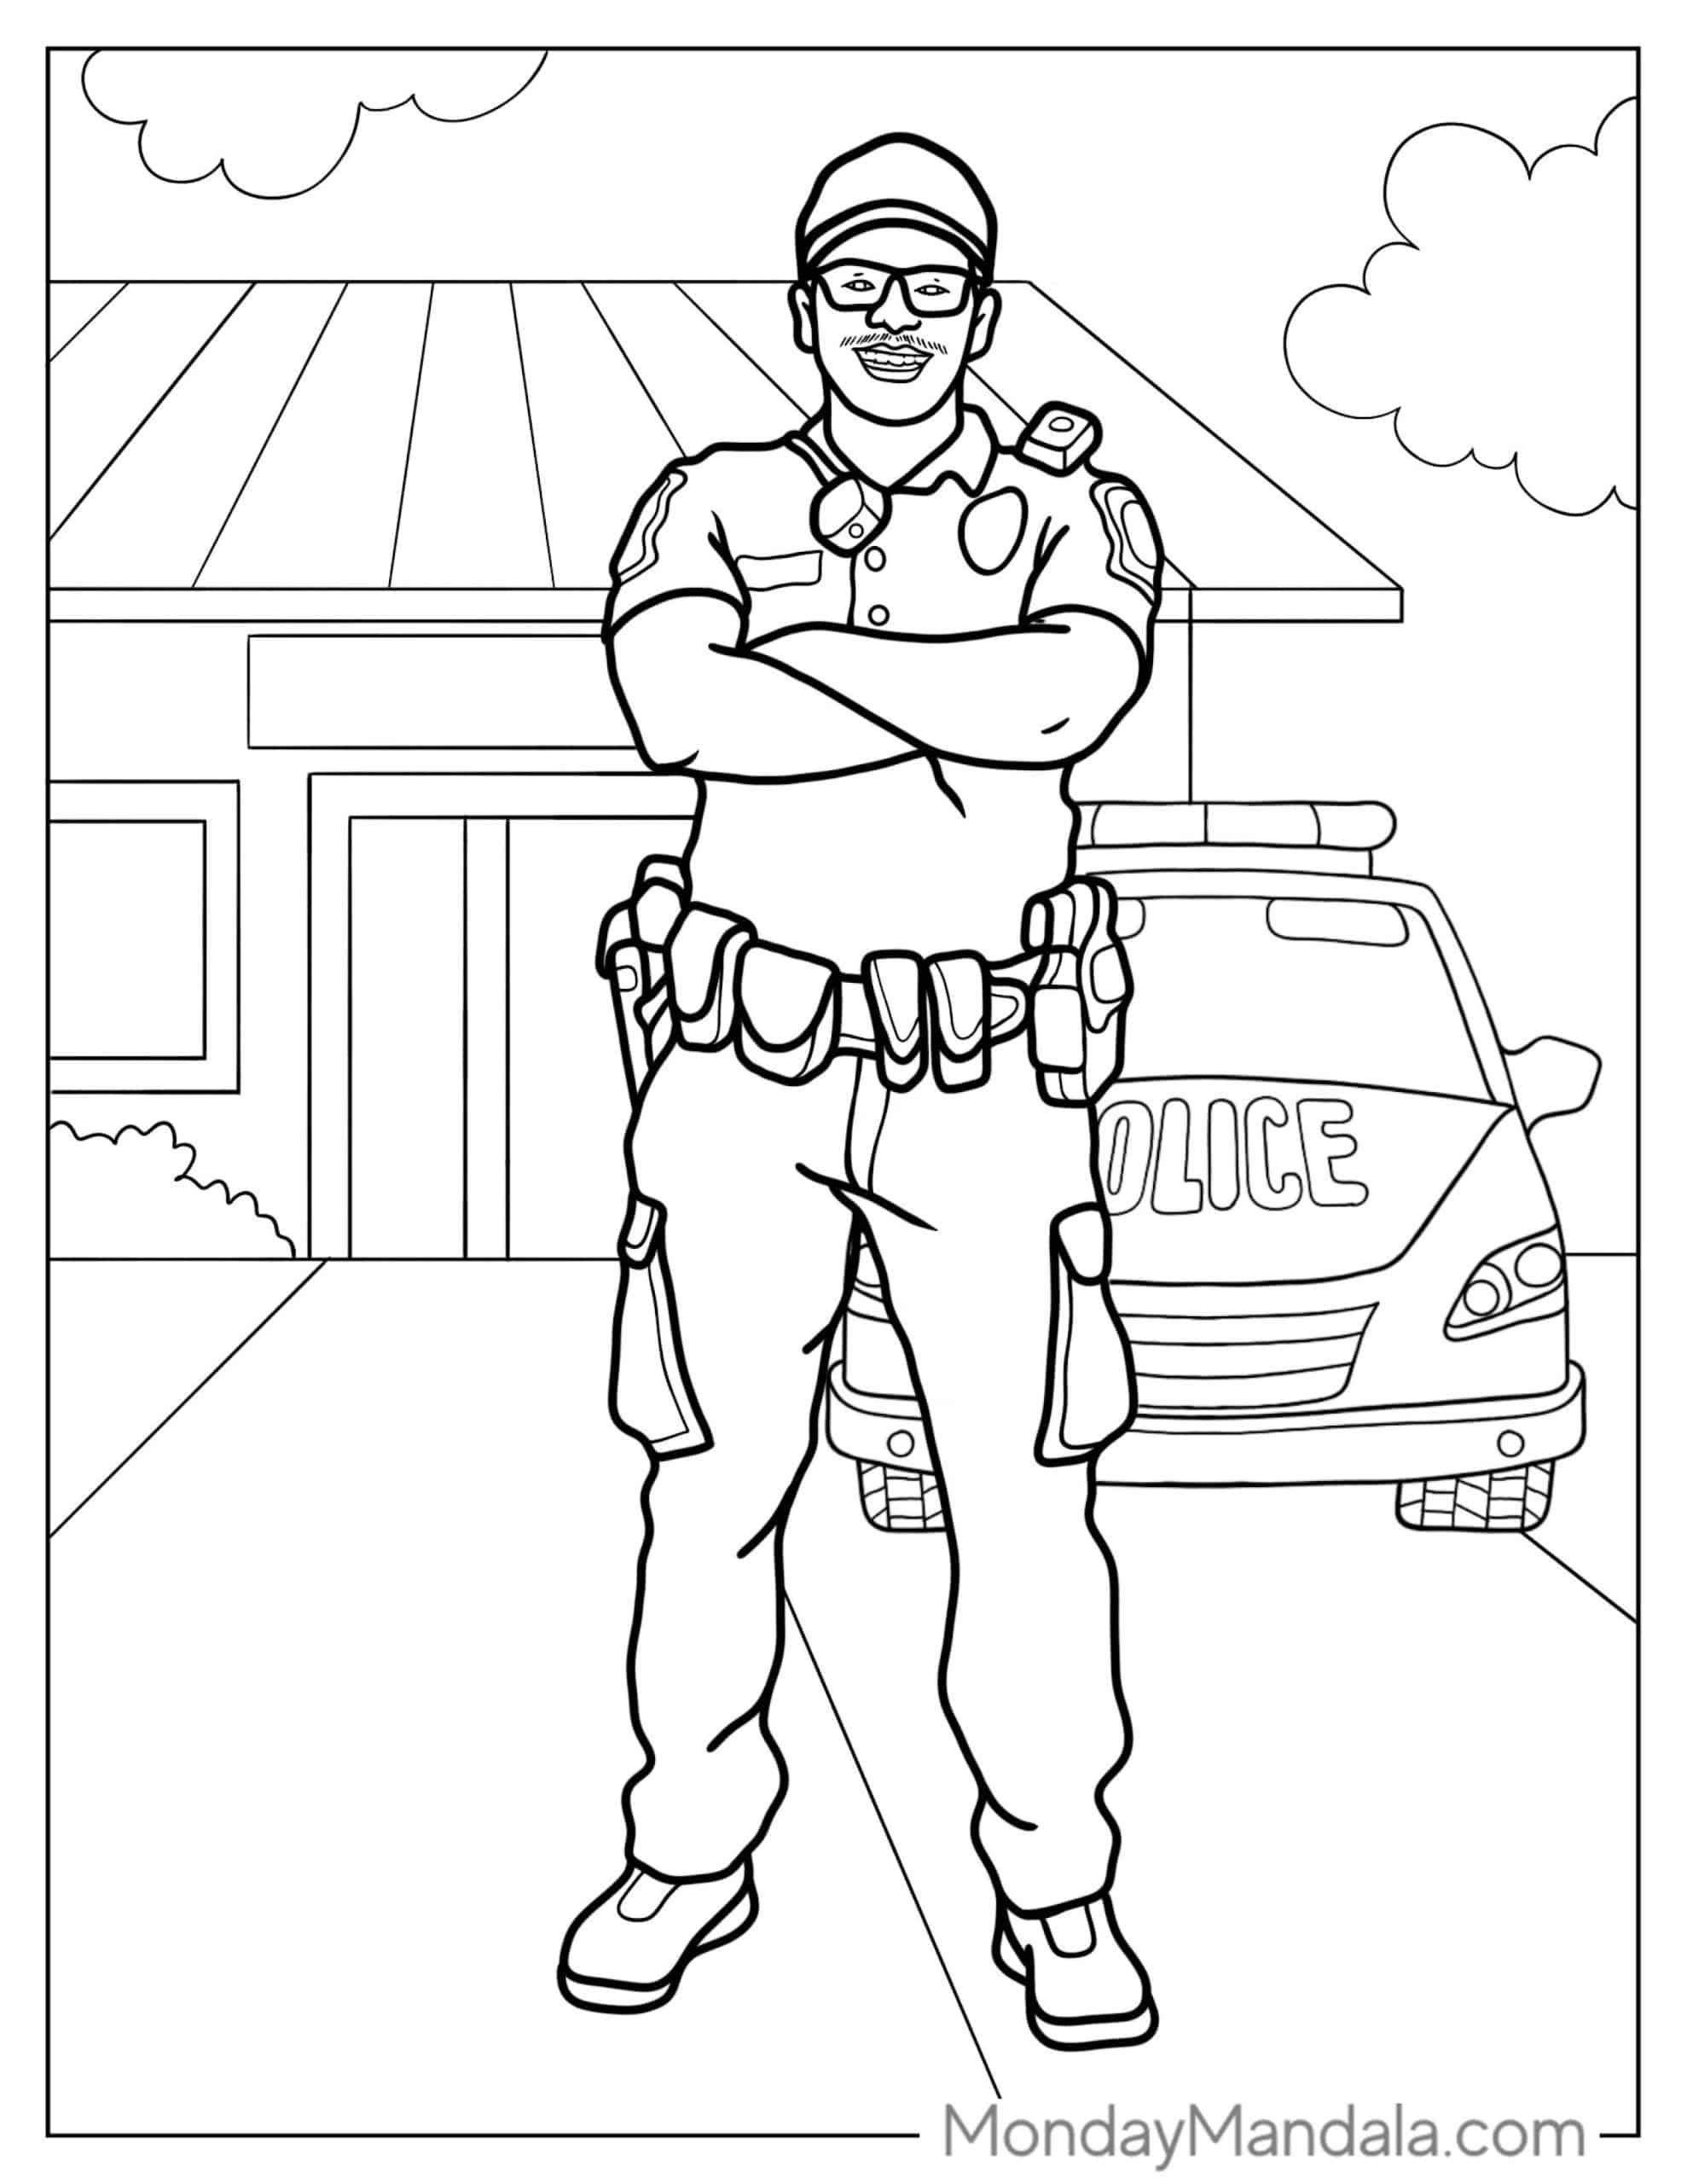 Police coloring pages free pdf printables in coloring pages police coloring sheets for kids